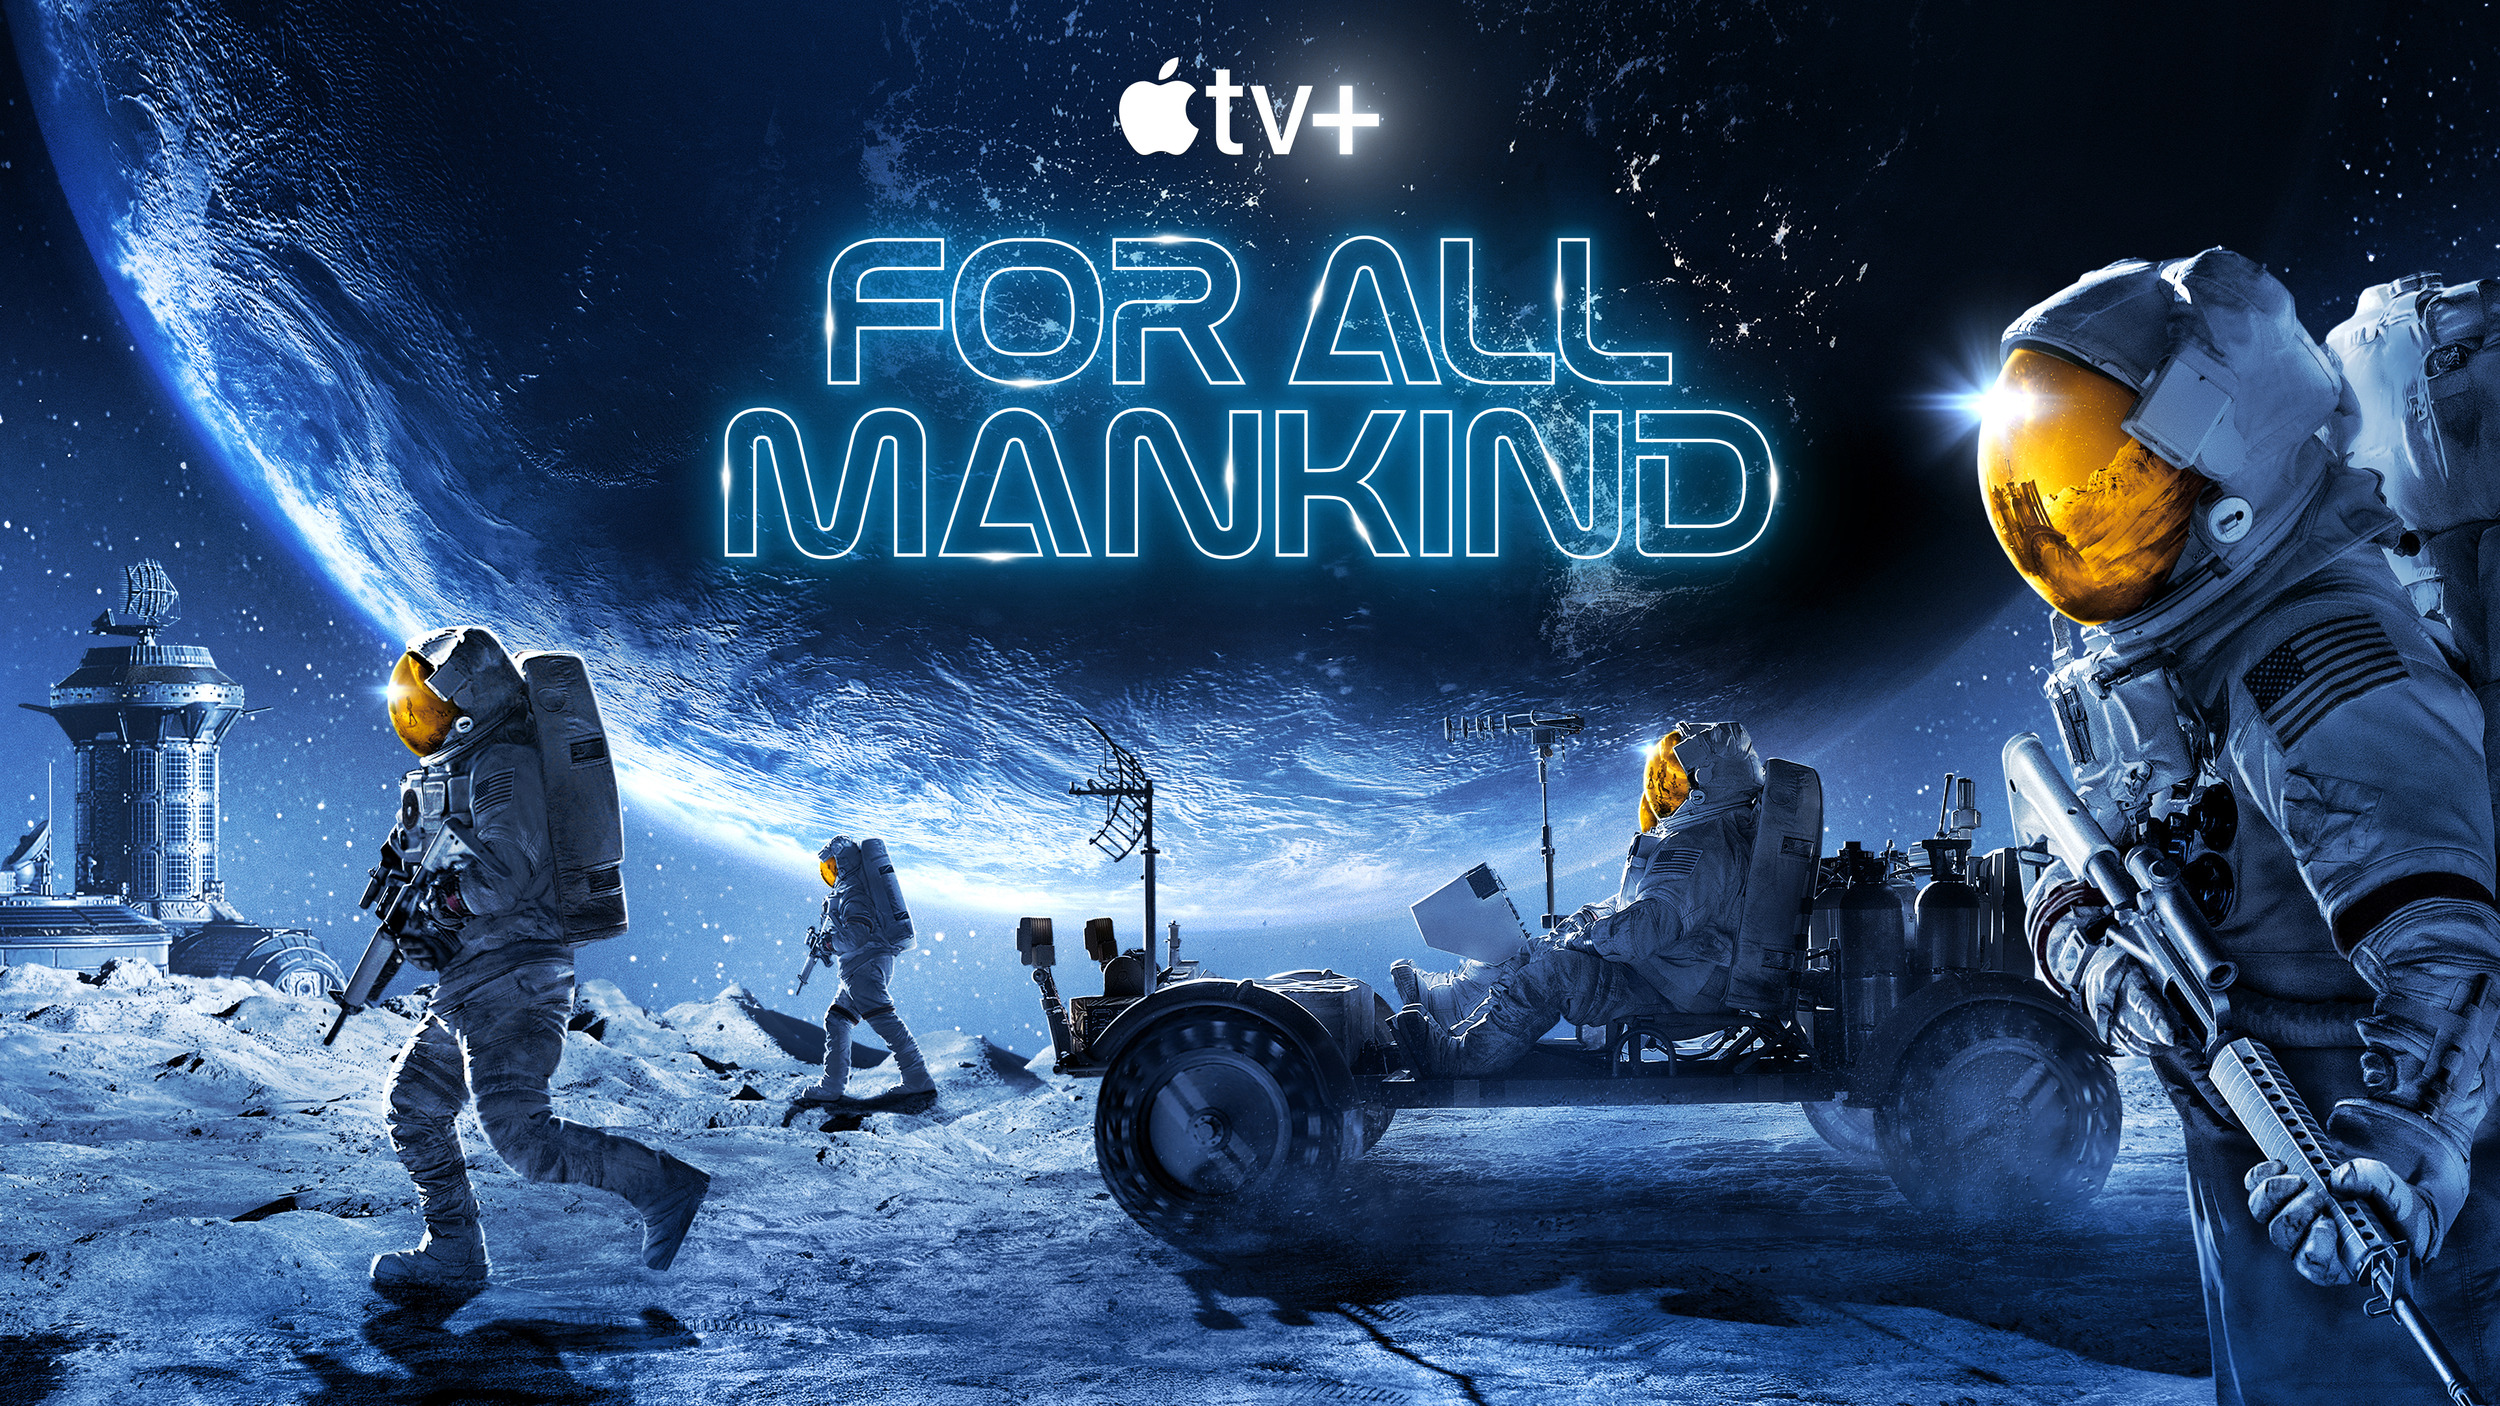 Mega Sized TV Poster Image for For All Mankind (#4 of 7)